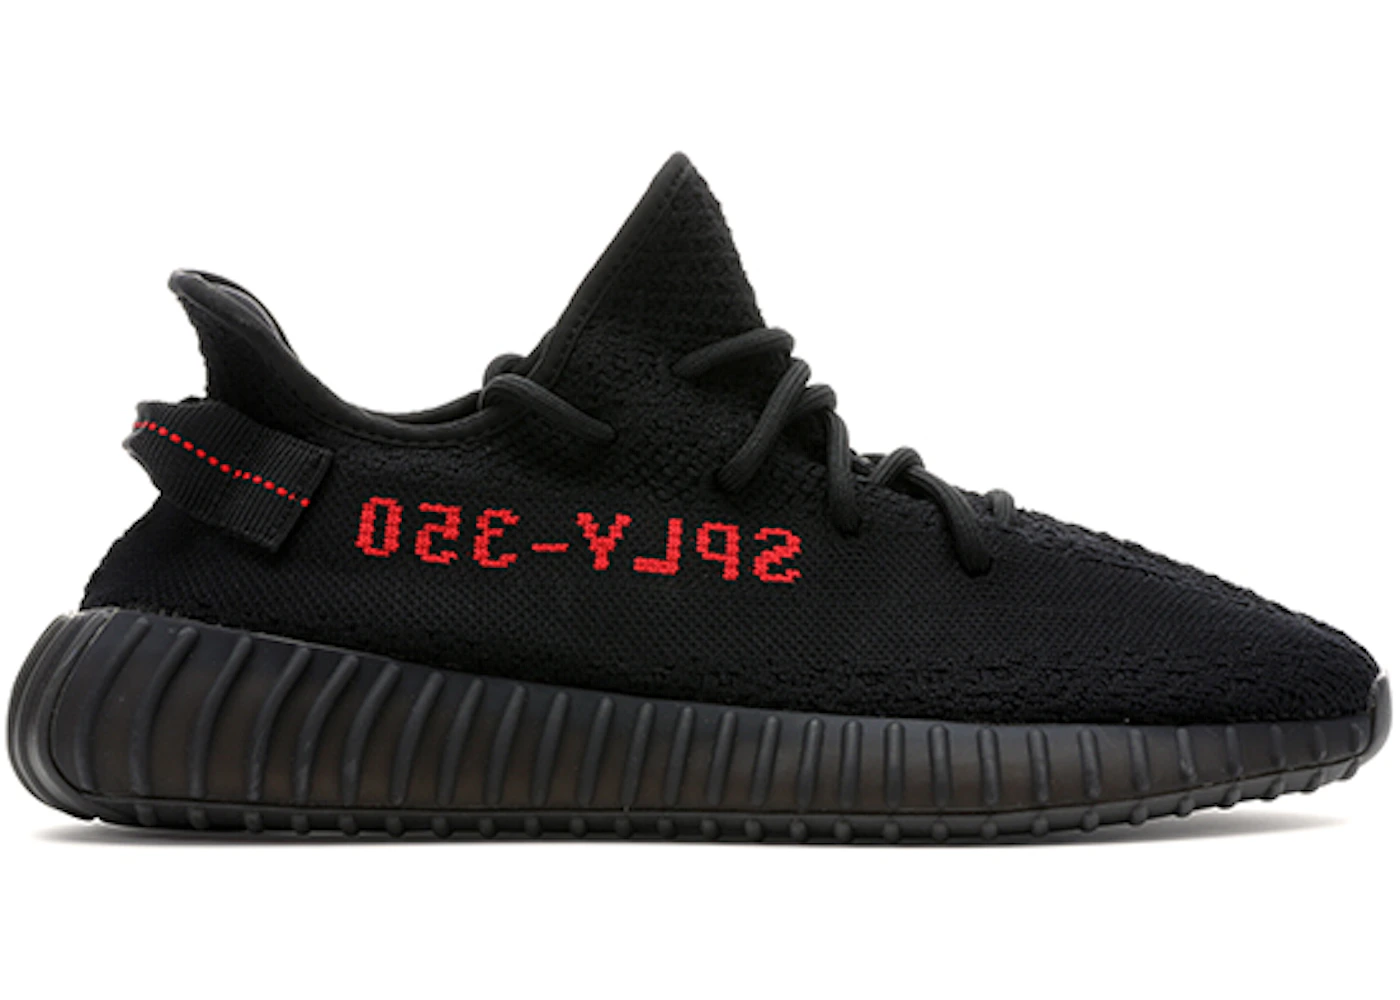 Funeral Comerciante itinerante descanso adidas Yeezy Boost 350 V2 Black Red (2017/2020) Men's - CP9652 - US